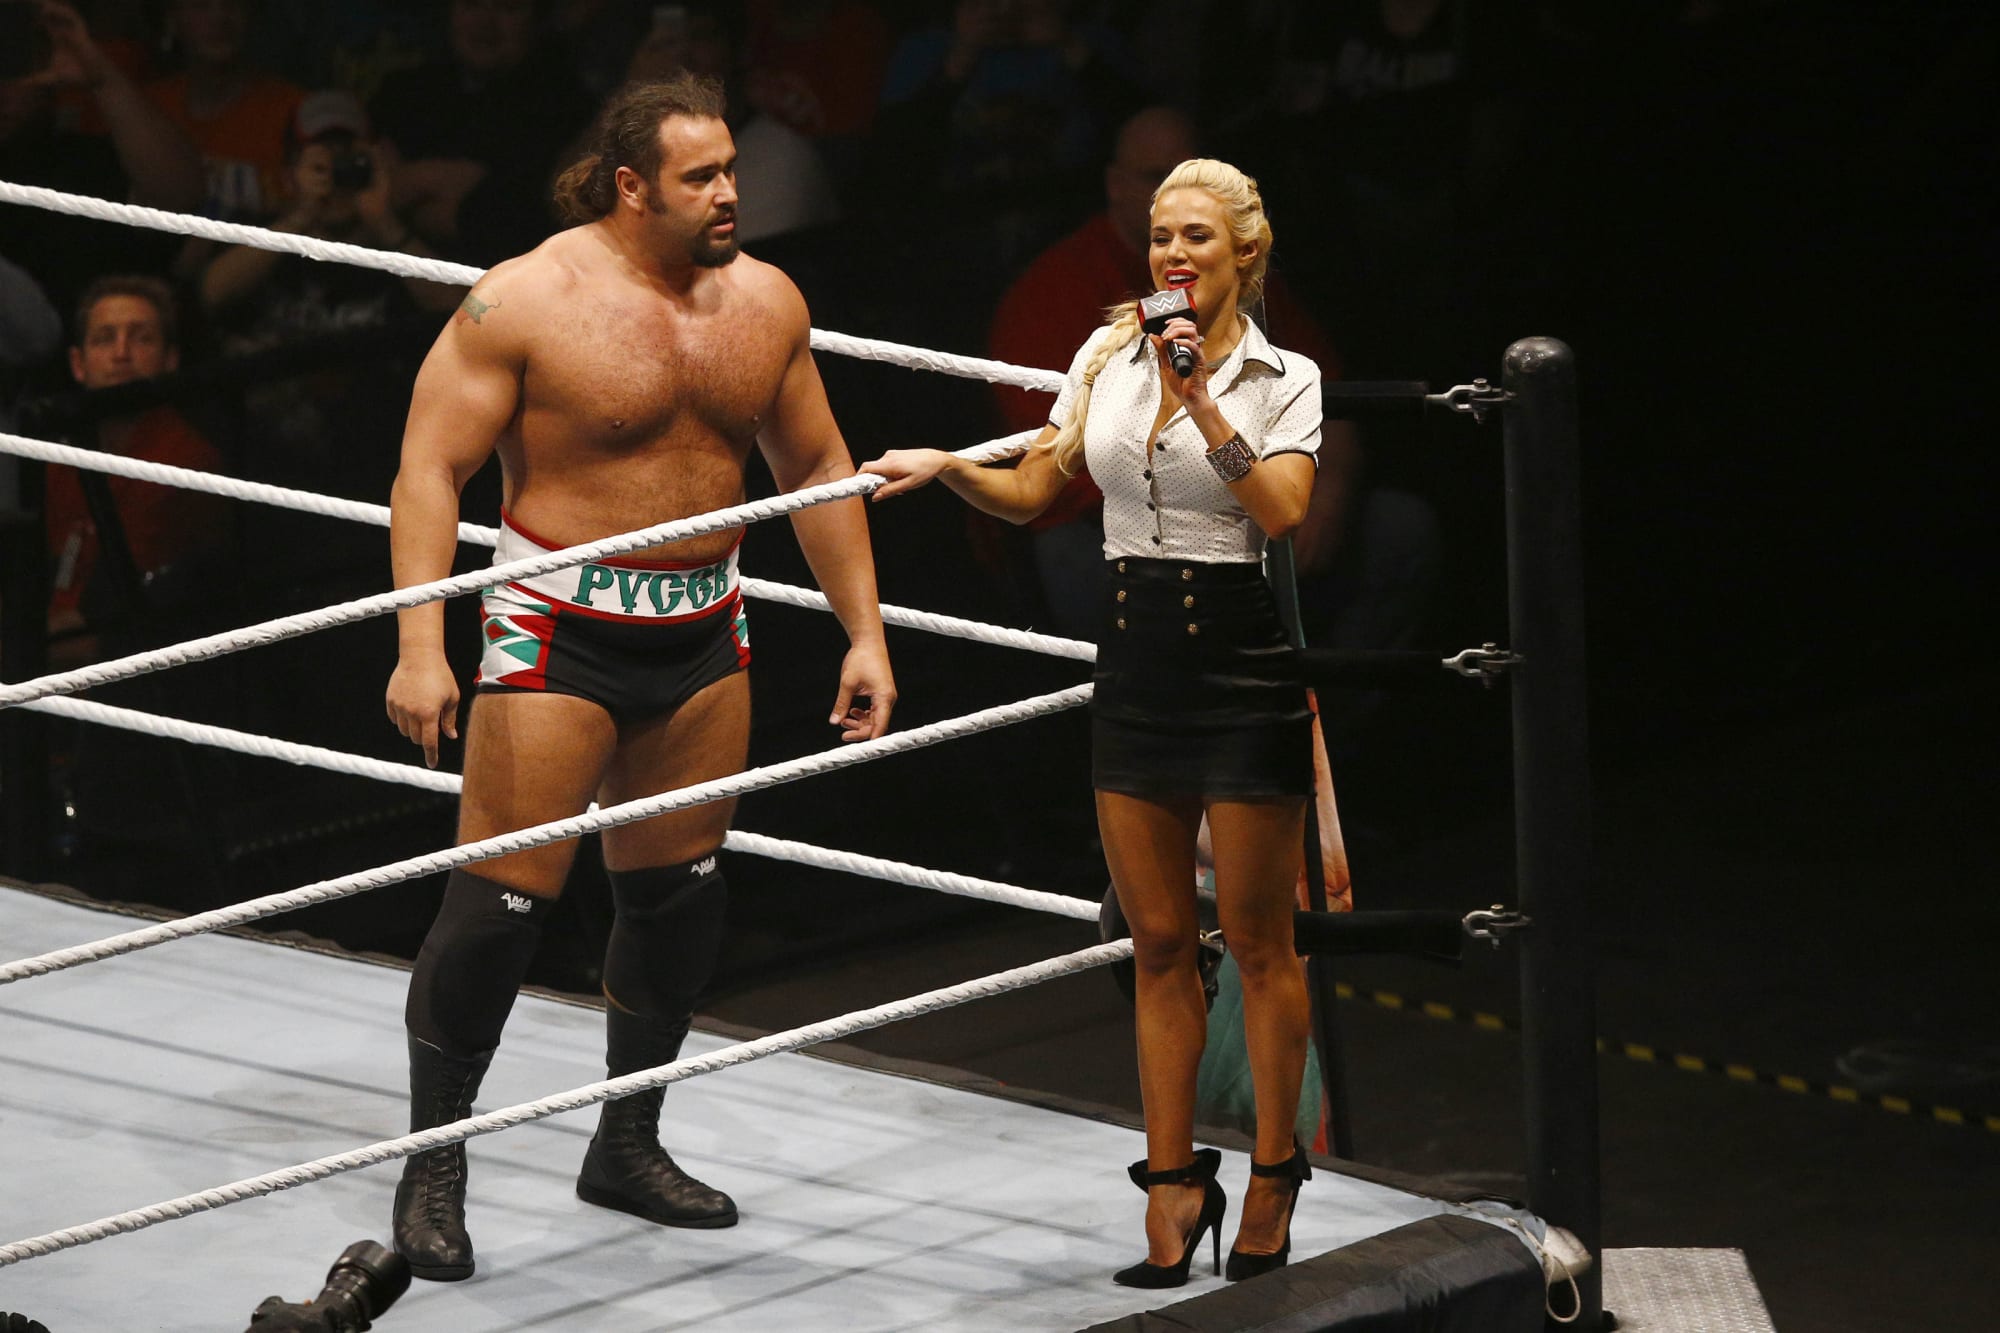 WWE Rusev and Lana work better together than ap pic